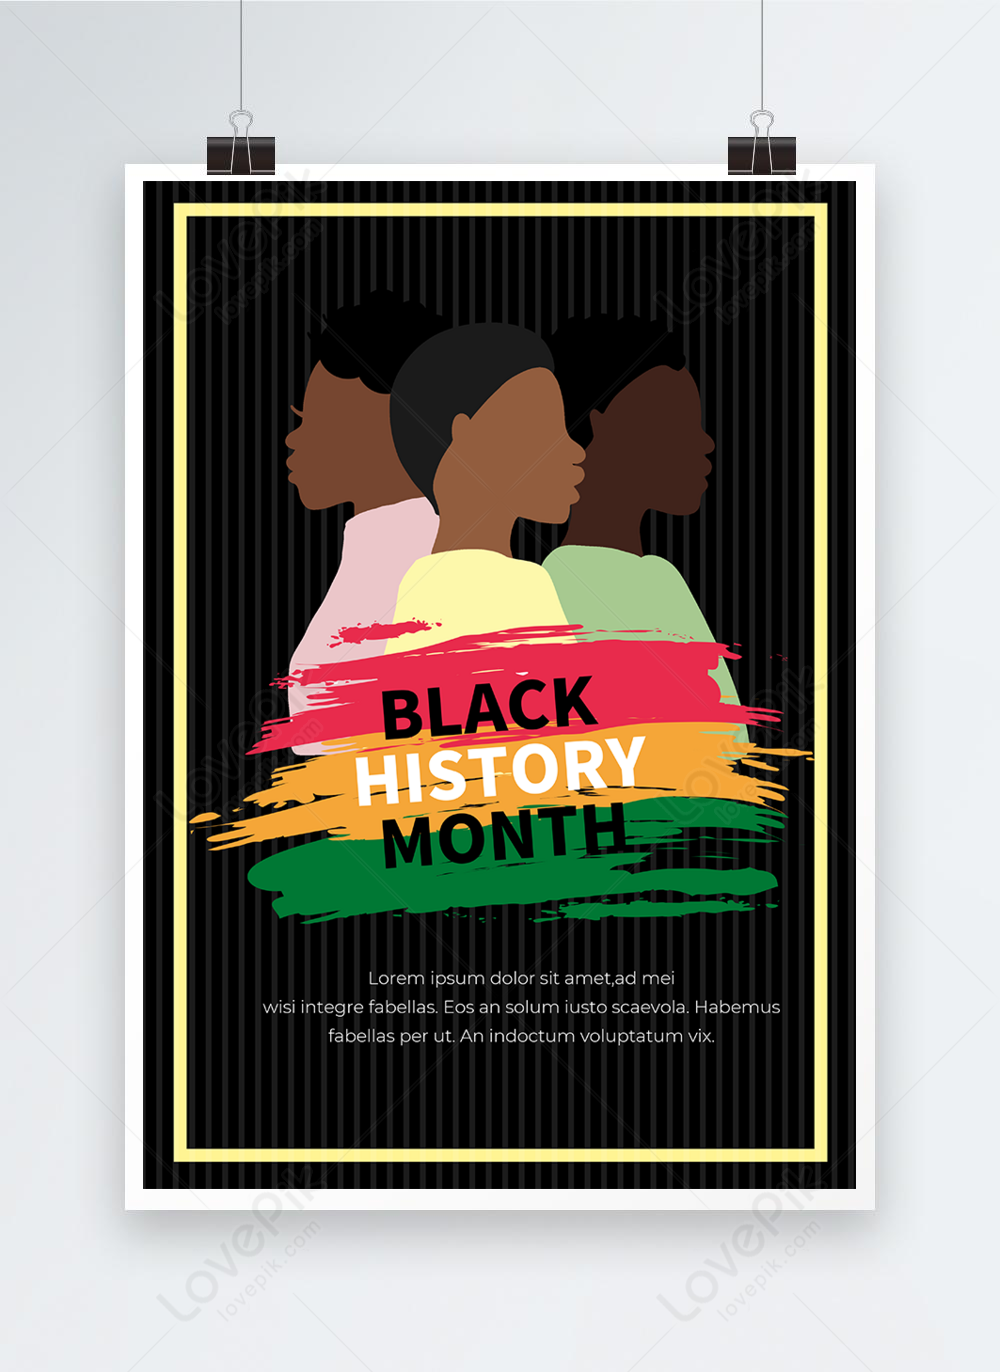 border-illustration-character-black-history-month-template-image-picture-free-download-465988704